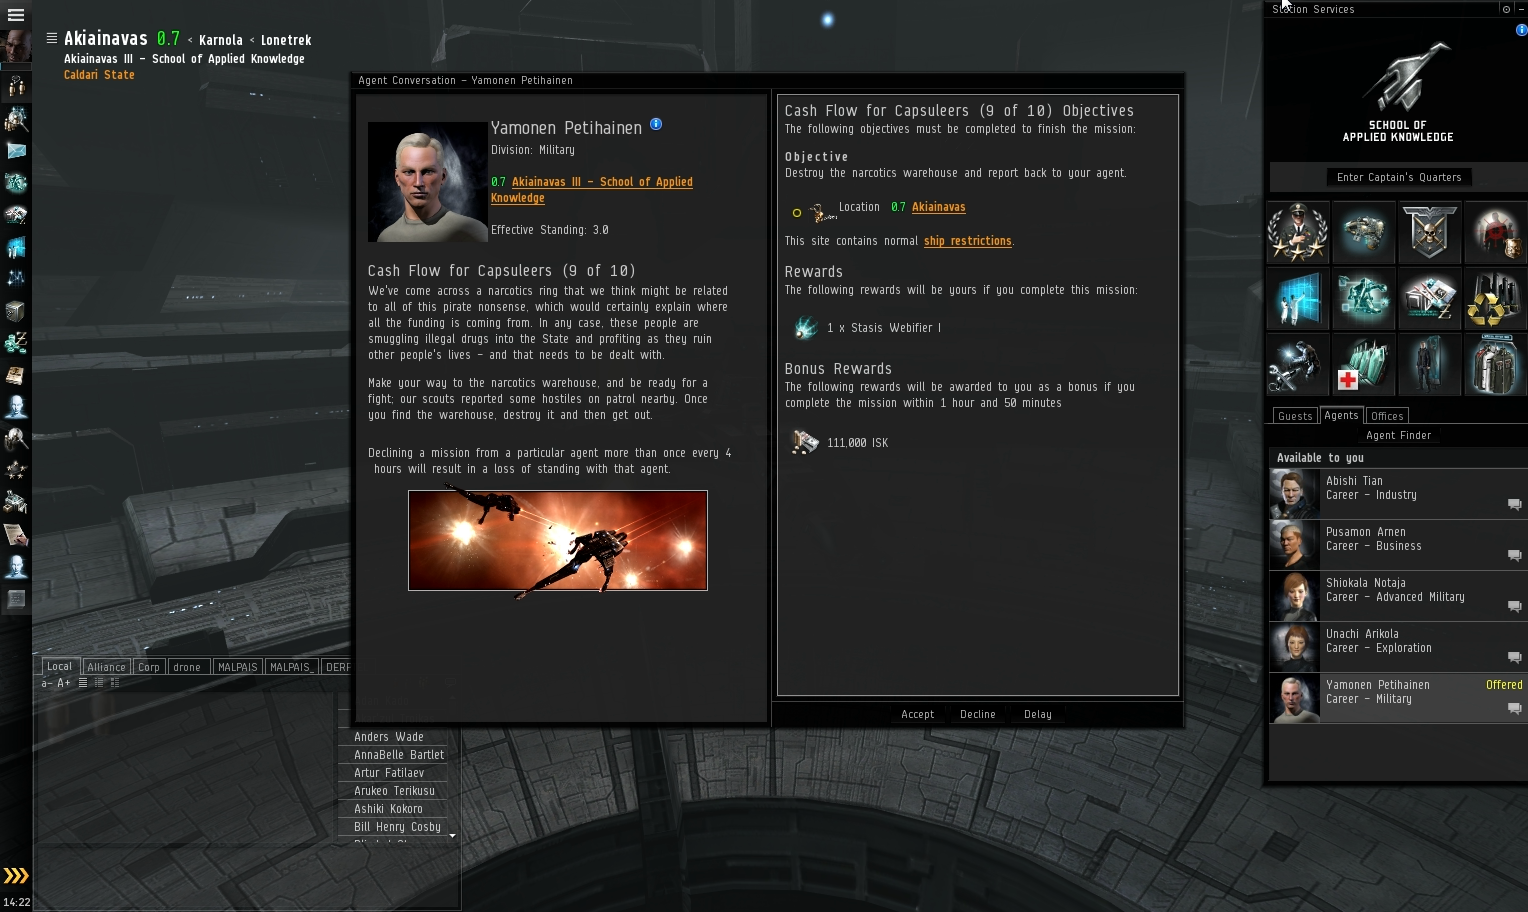 EVE Online - Military Career Arc: Cash Flow for Capsuleers (9 of 10)